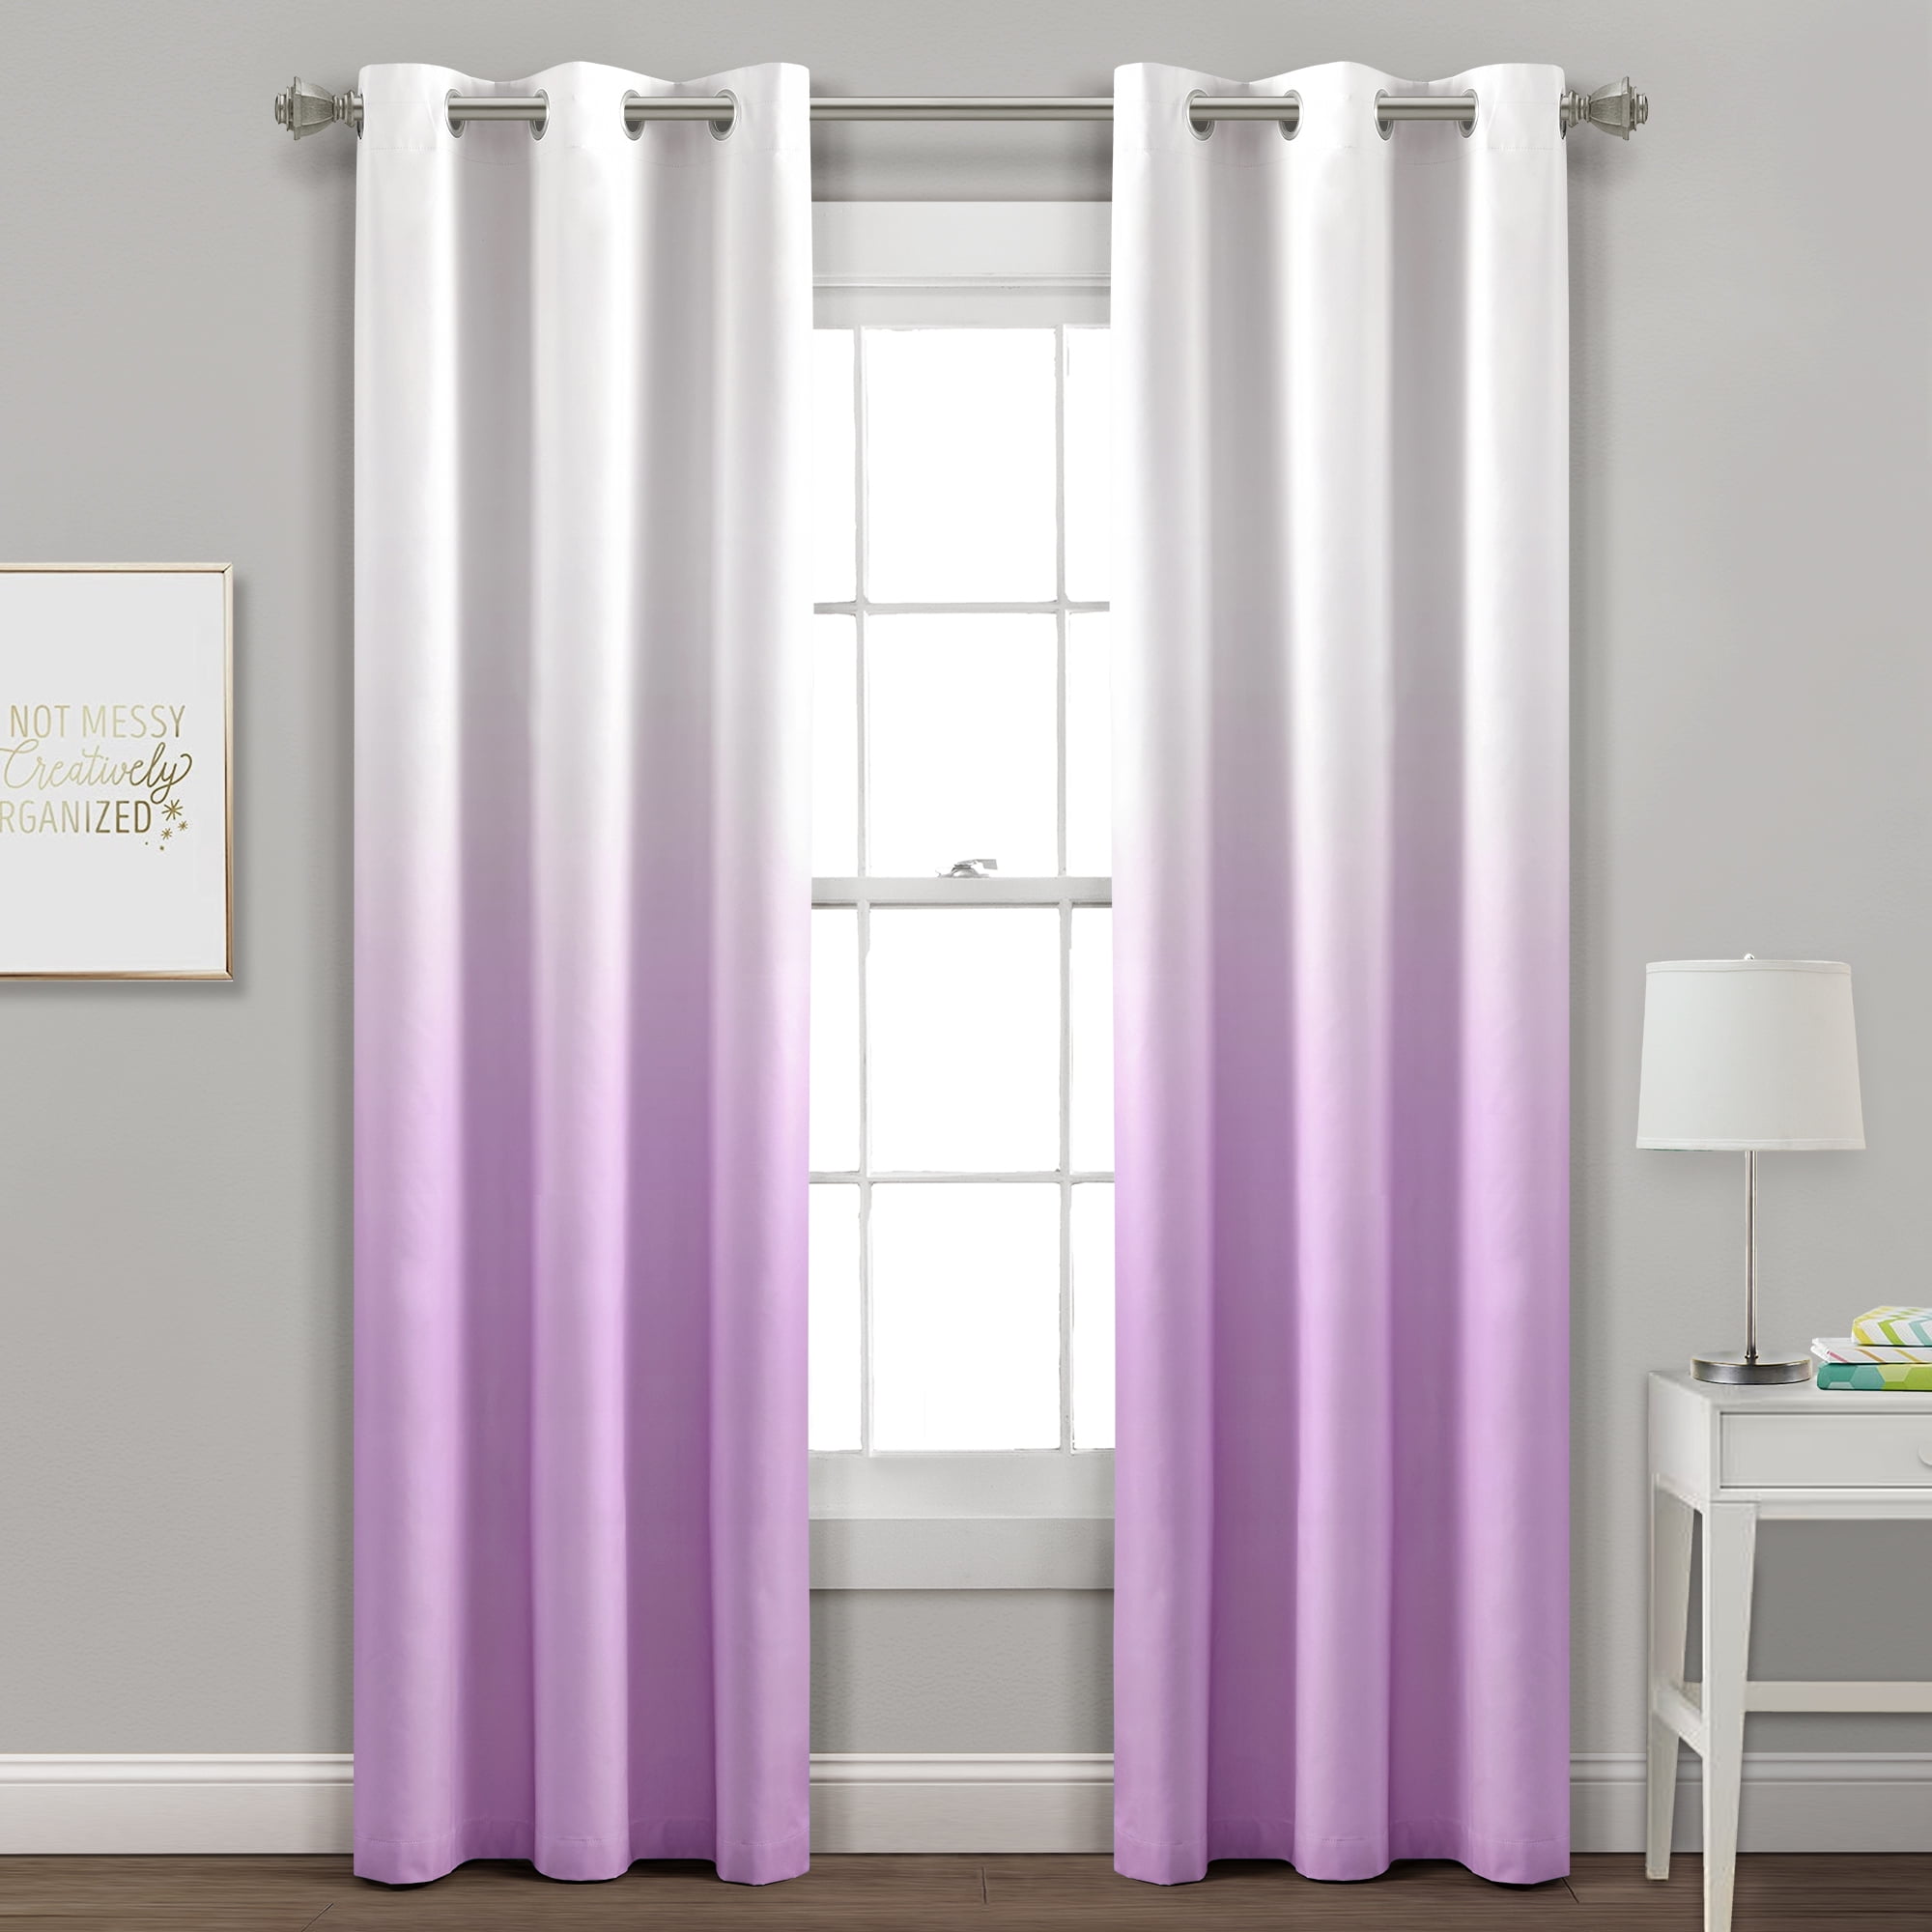 100% Blackout Panels Heavy Thick Grommet Bay Window Curtain 1 Set Lilac 